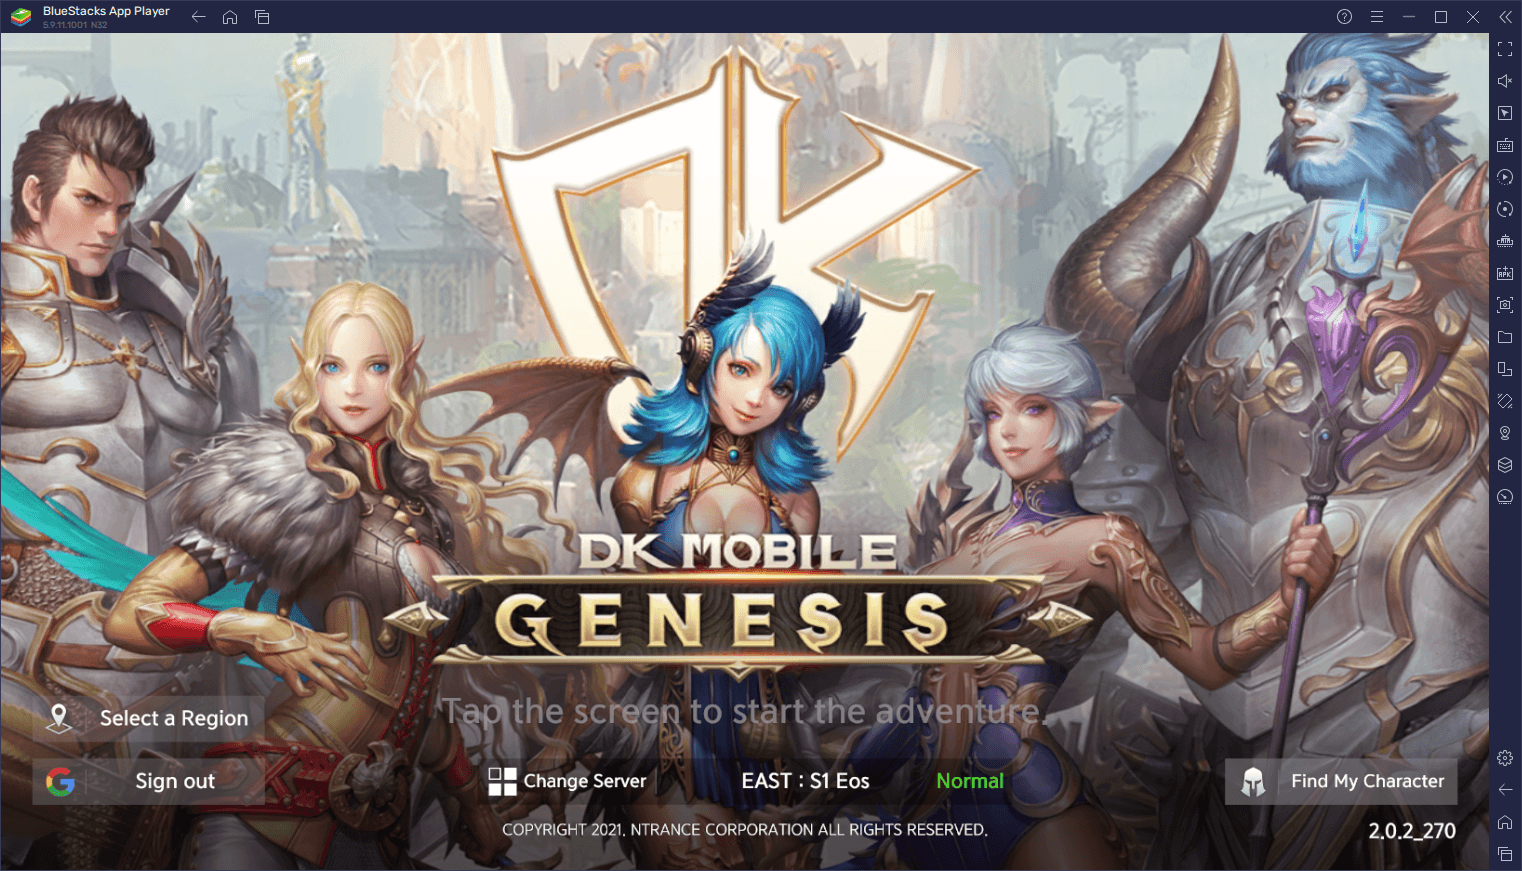 DK Mobile: Genesis Class Guide - Everything You Need to Know About the Different Classes